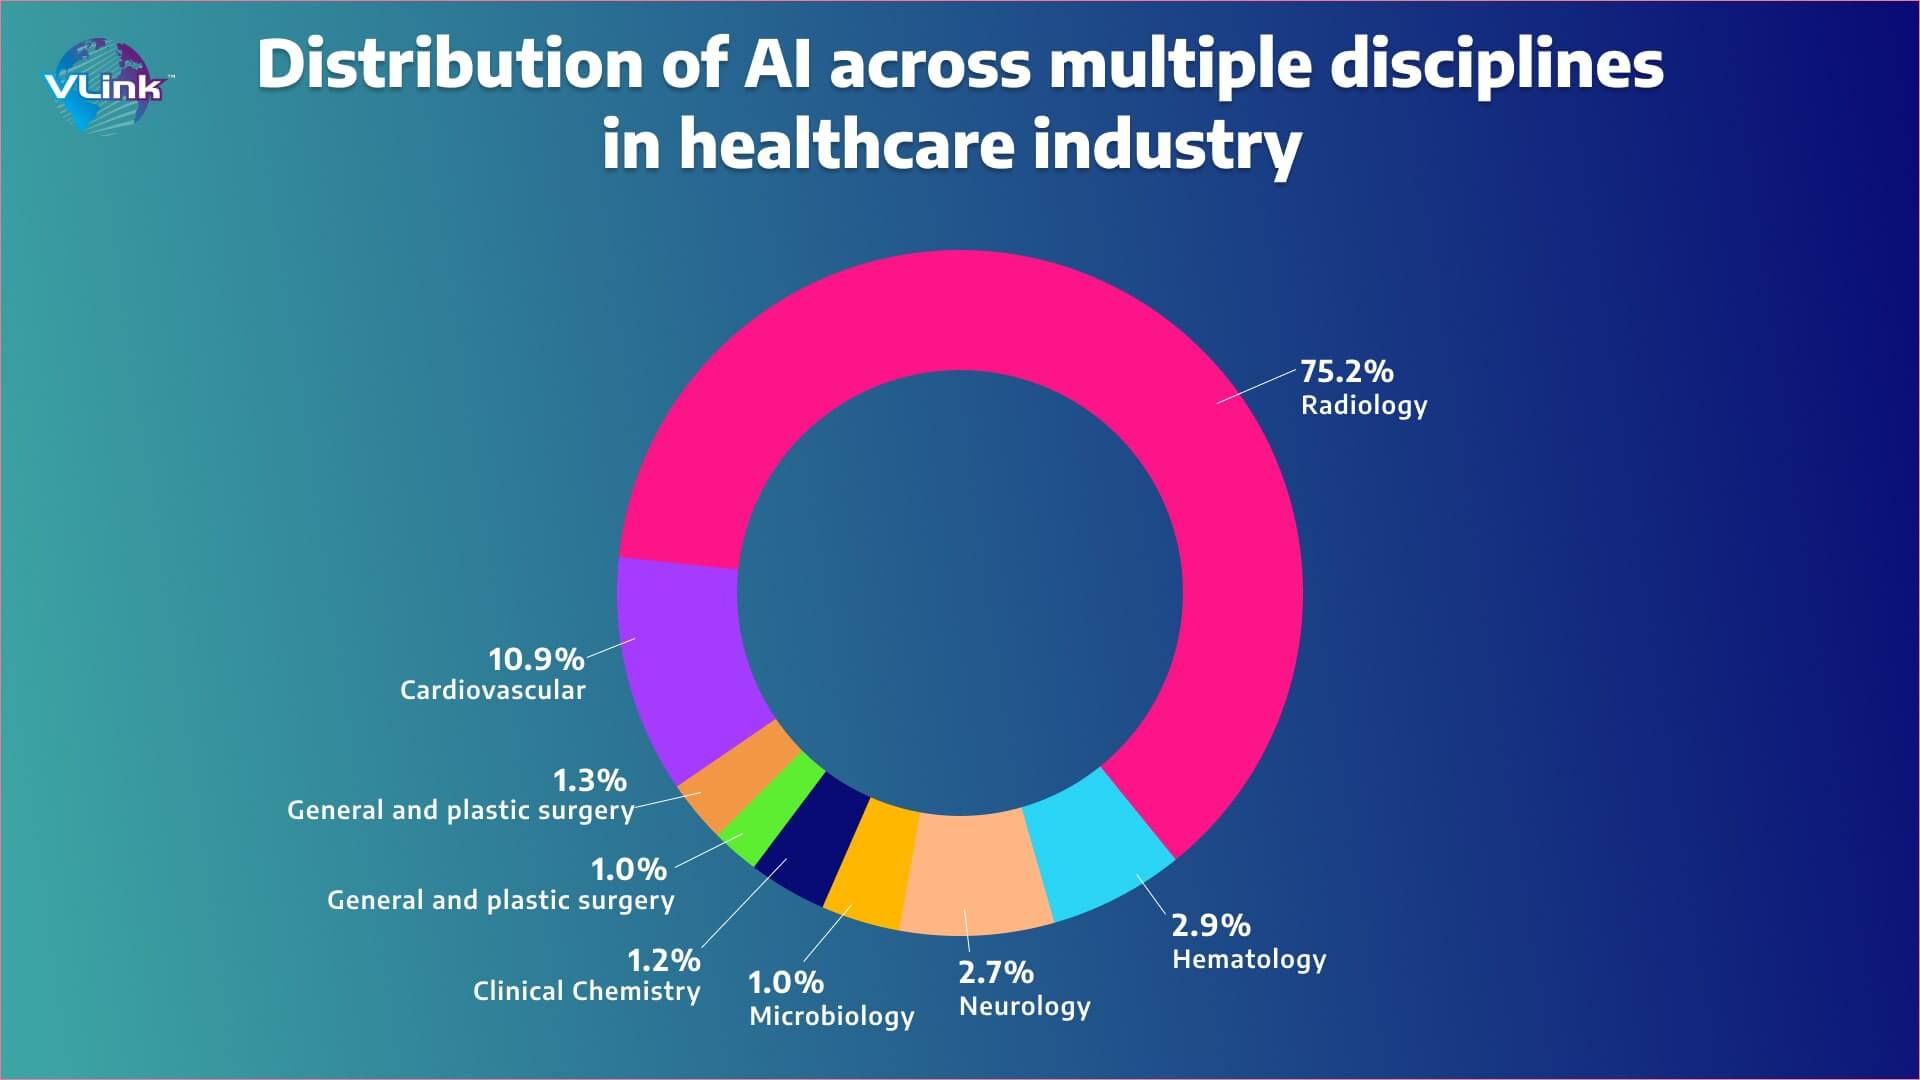 Distribution of AI across multiple disciplines in healthcare industry